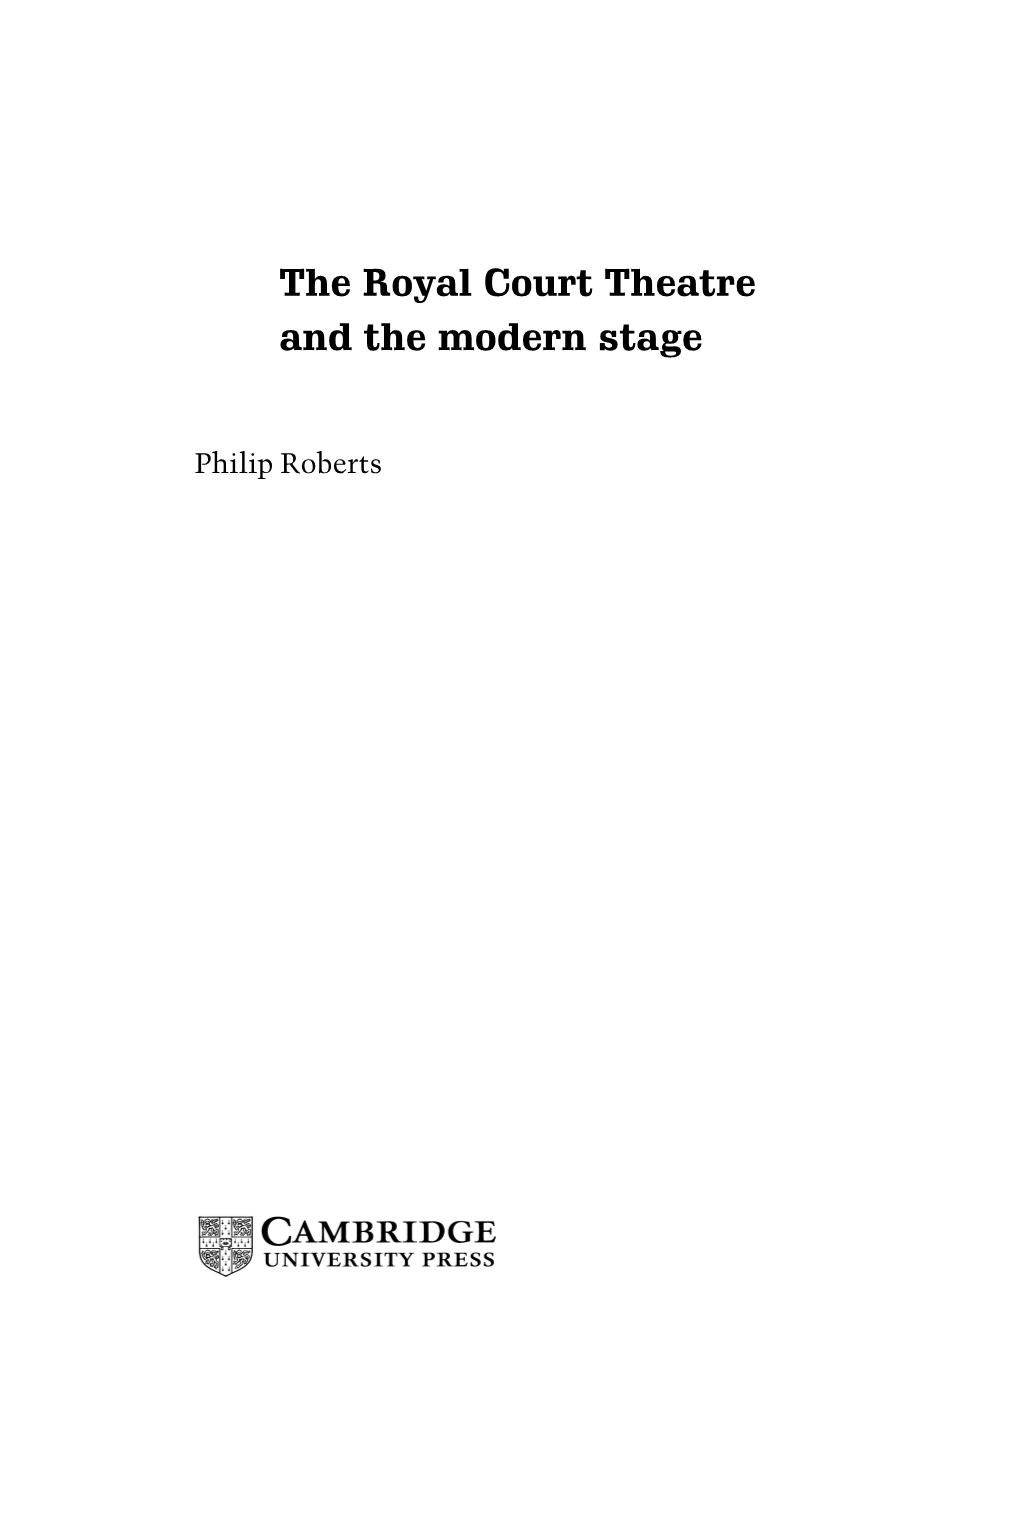 The Royal Court Theatre and the Modern Stage